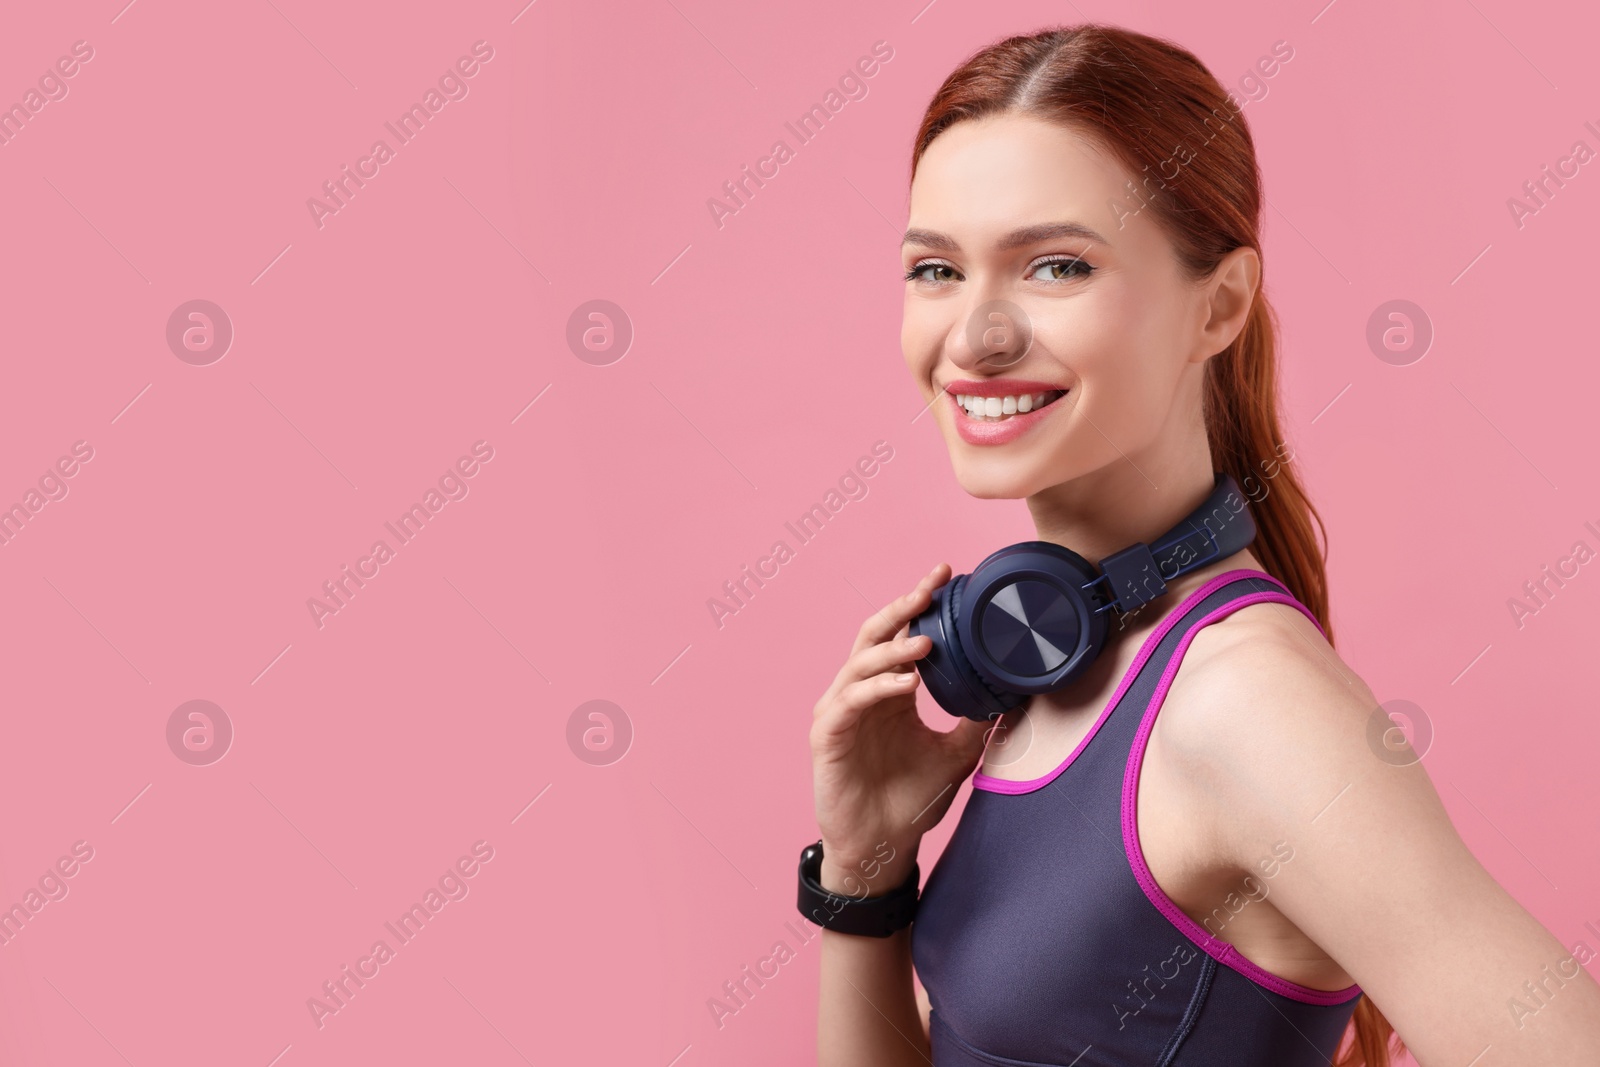 Photo of Woman in sportswear and headphones on pink background, space for text